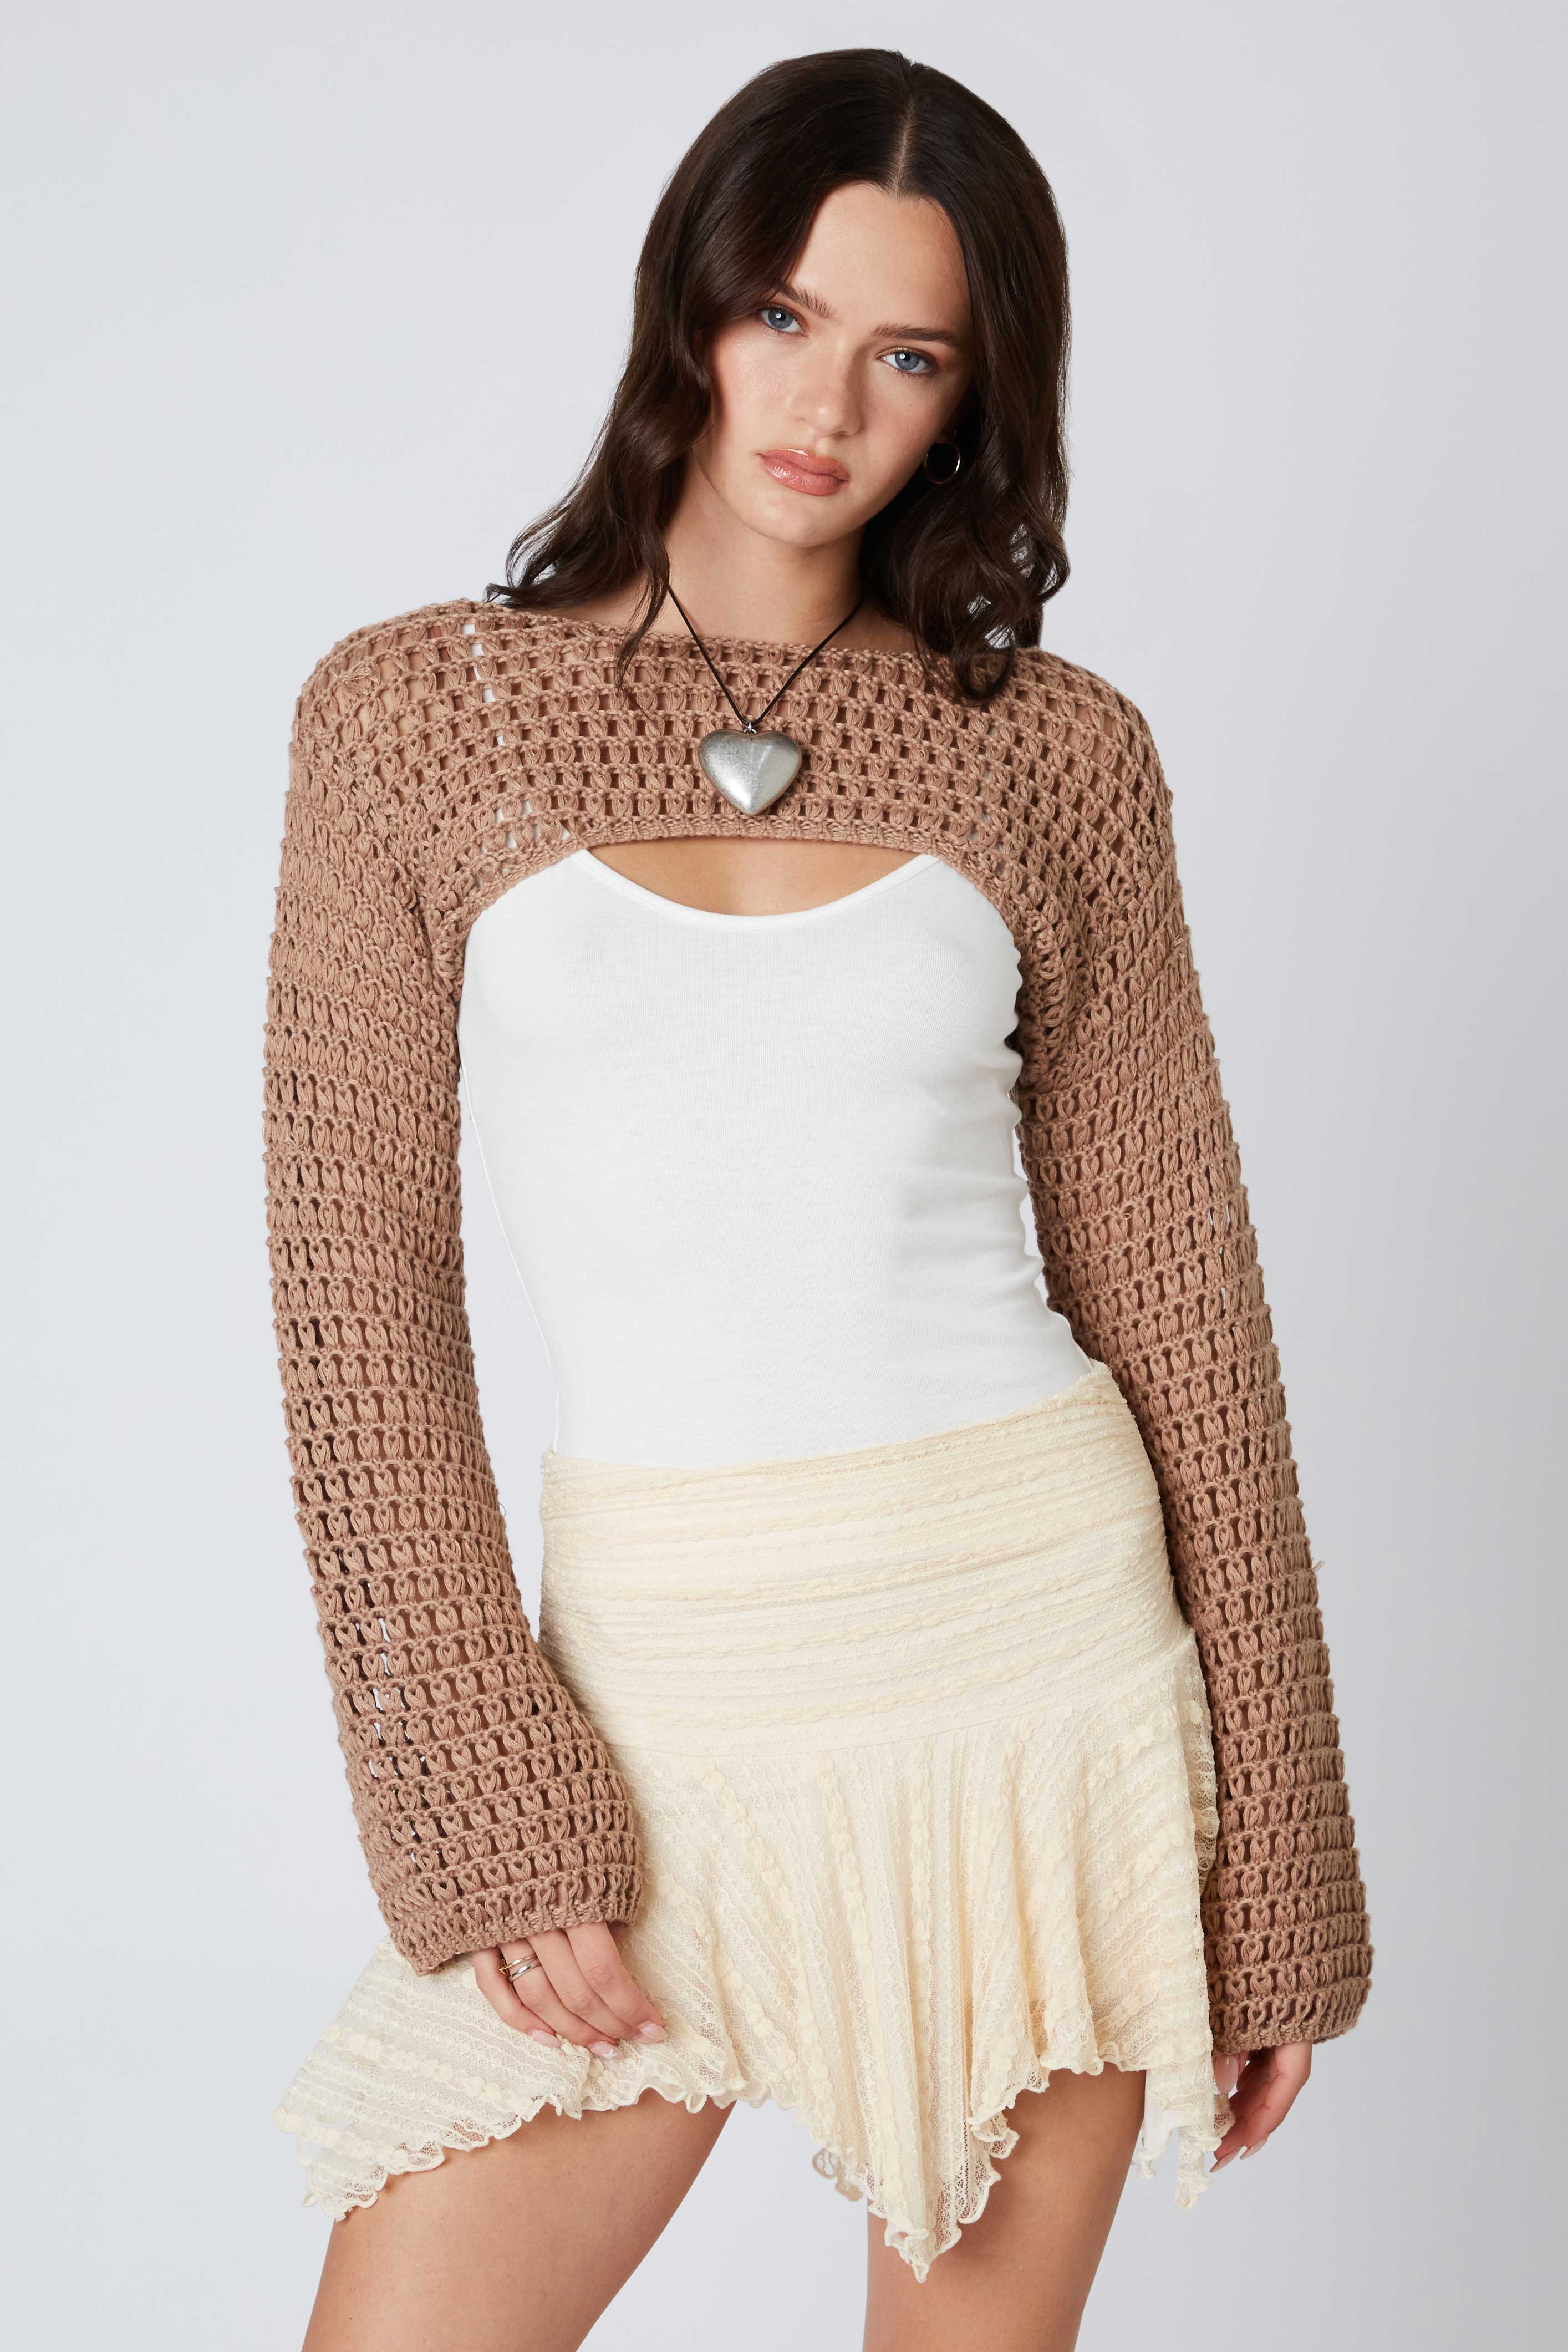 Open Knit Shrug in Mocha Front View